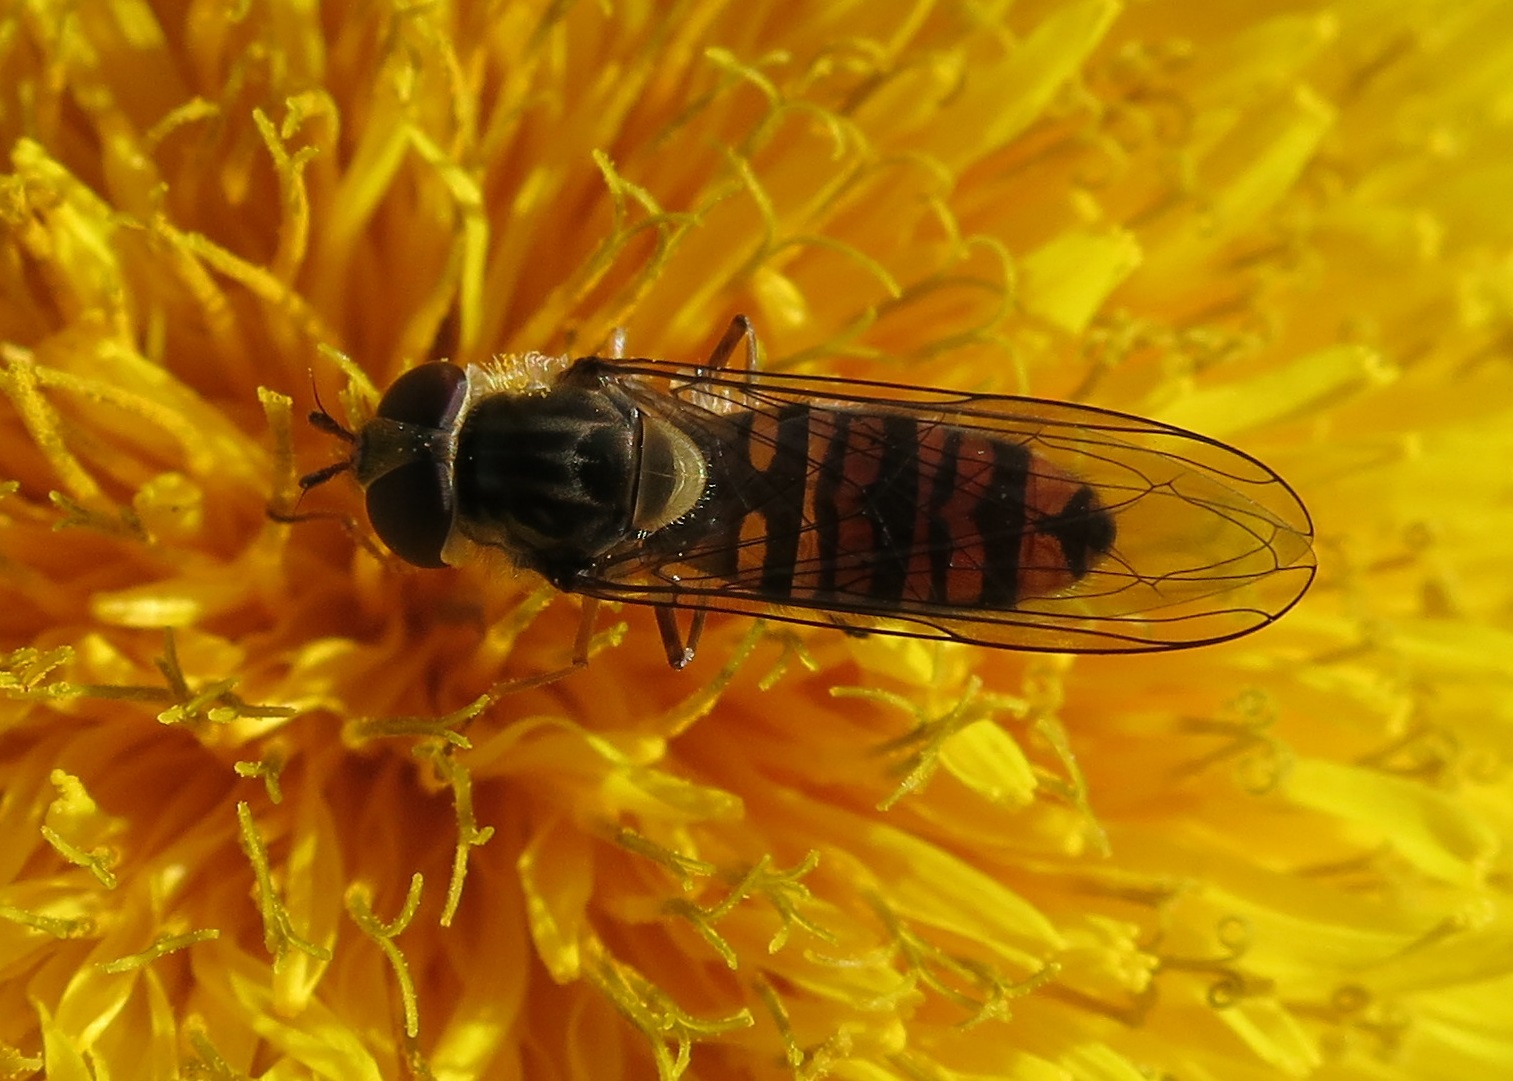 Marmalade Hoverfly (Episyrphus balteatus) with wings shut across its back on a dandelion type flower. (Maybe even a dandelion!)